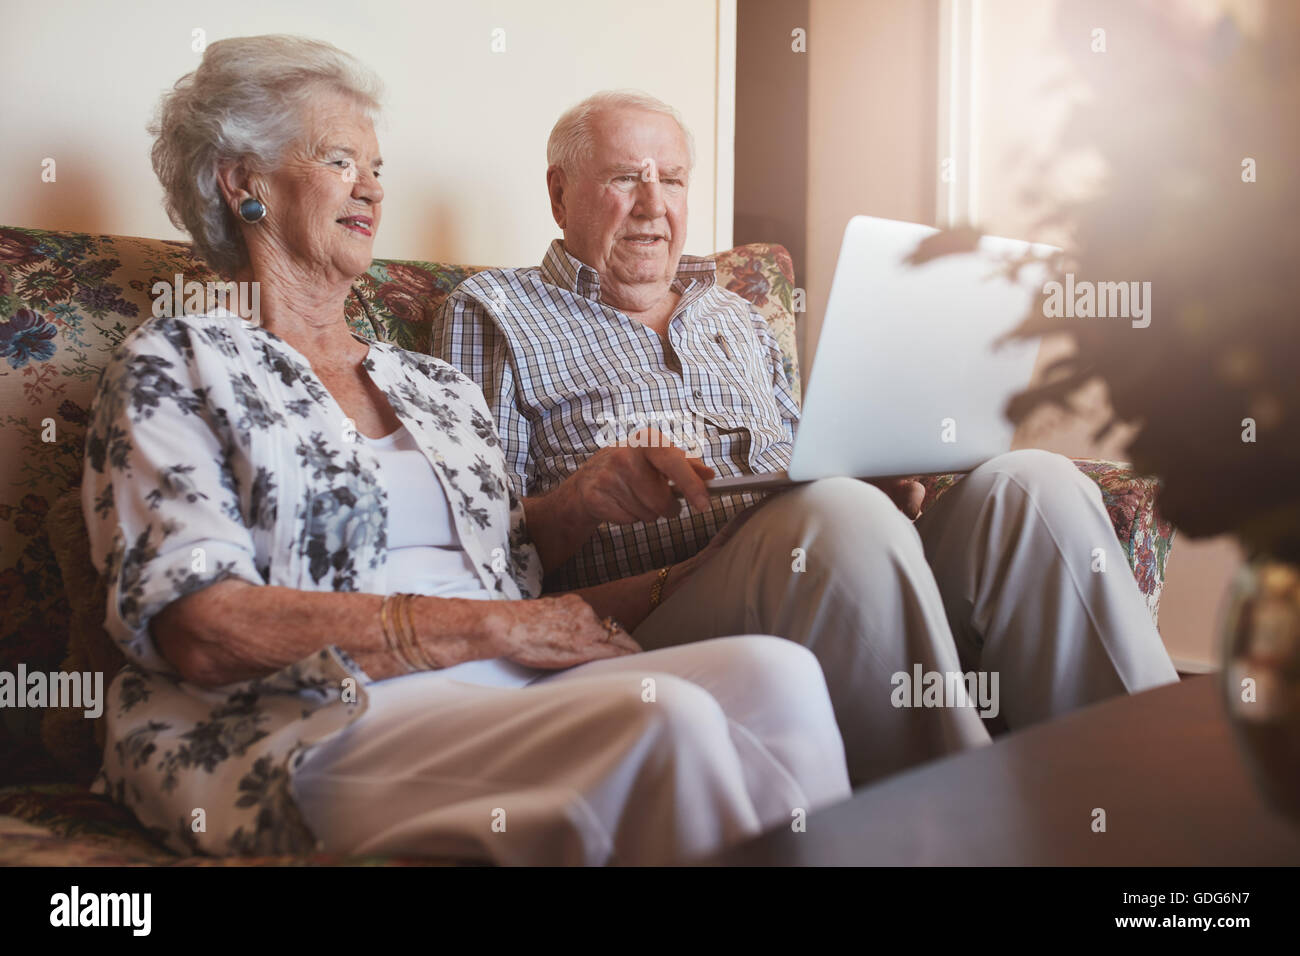 Portrait of happy senior couple sitting together and using laptop computer. Stock Photo